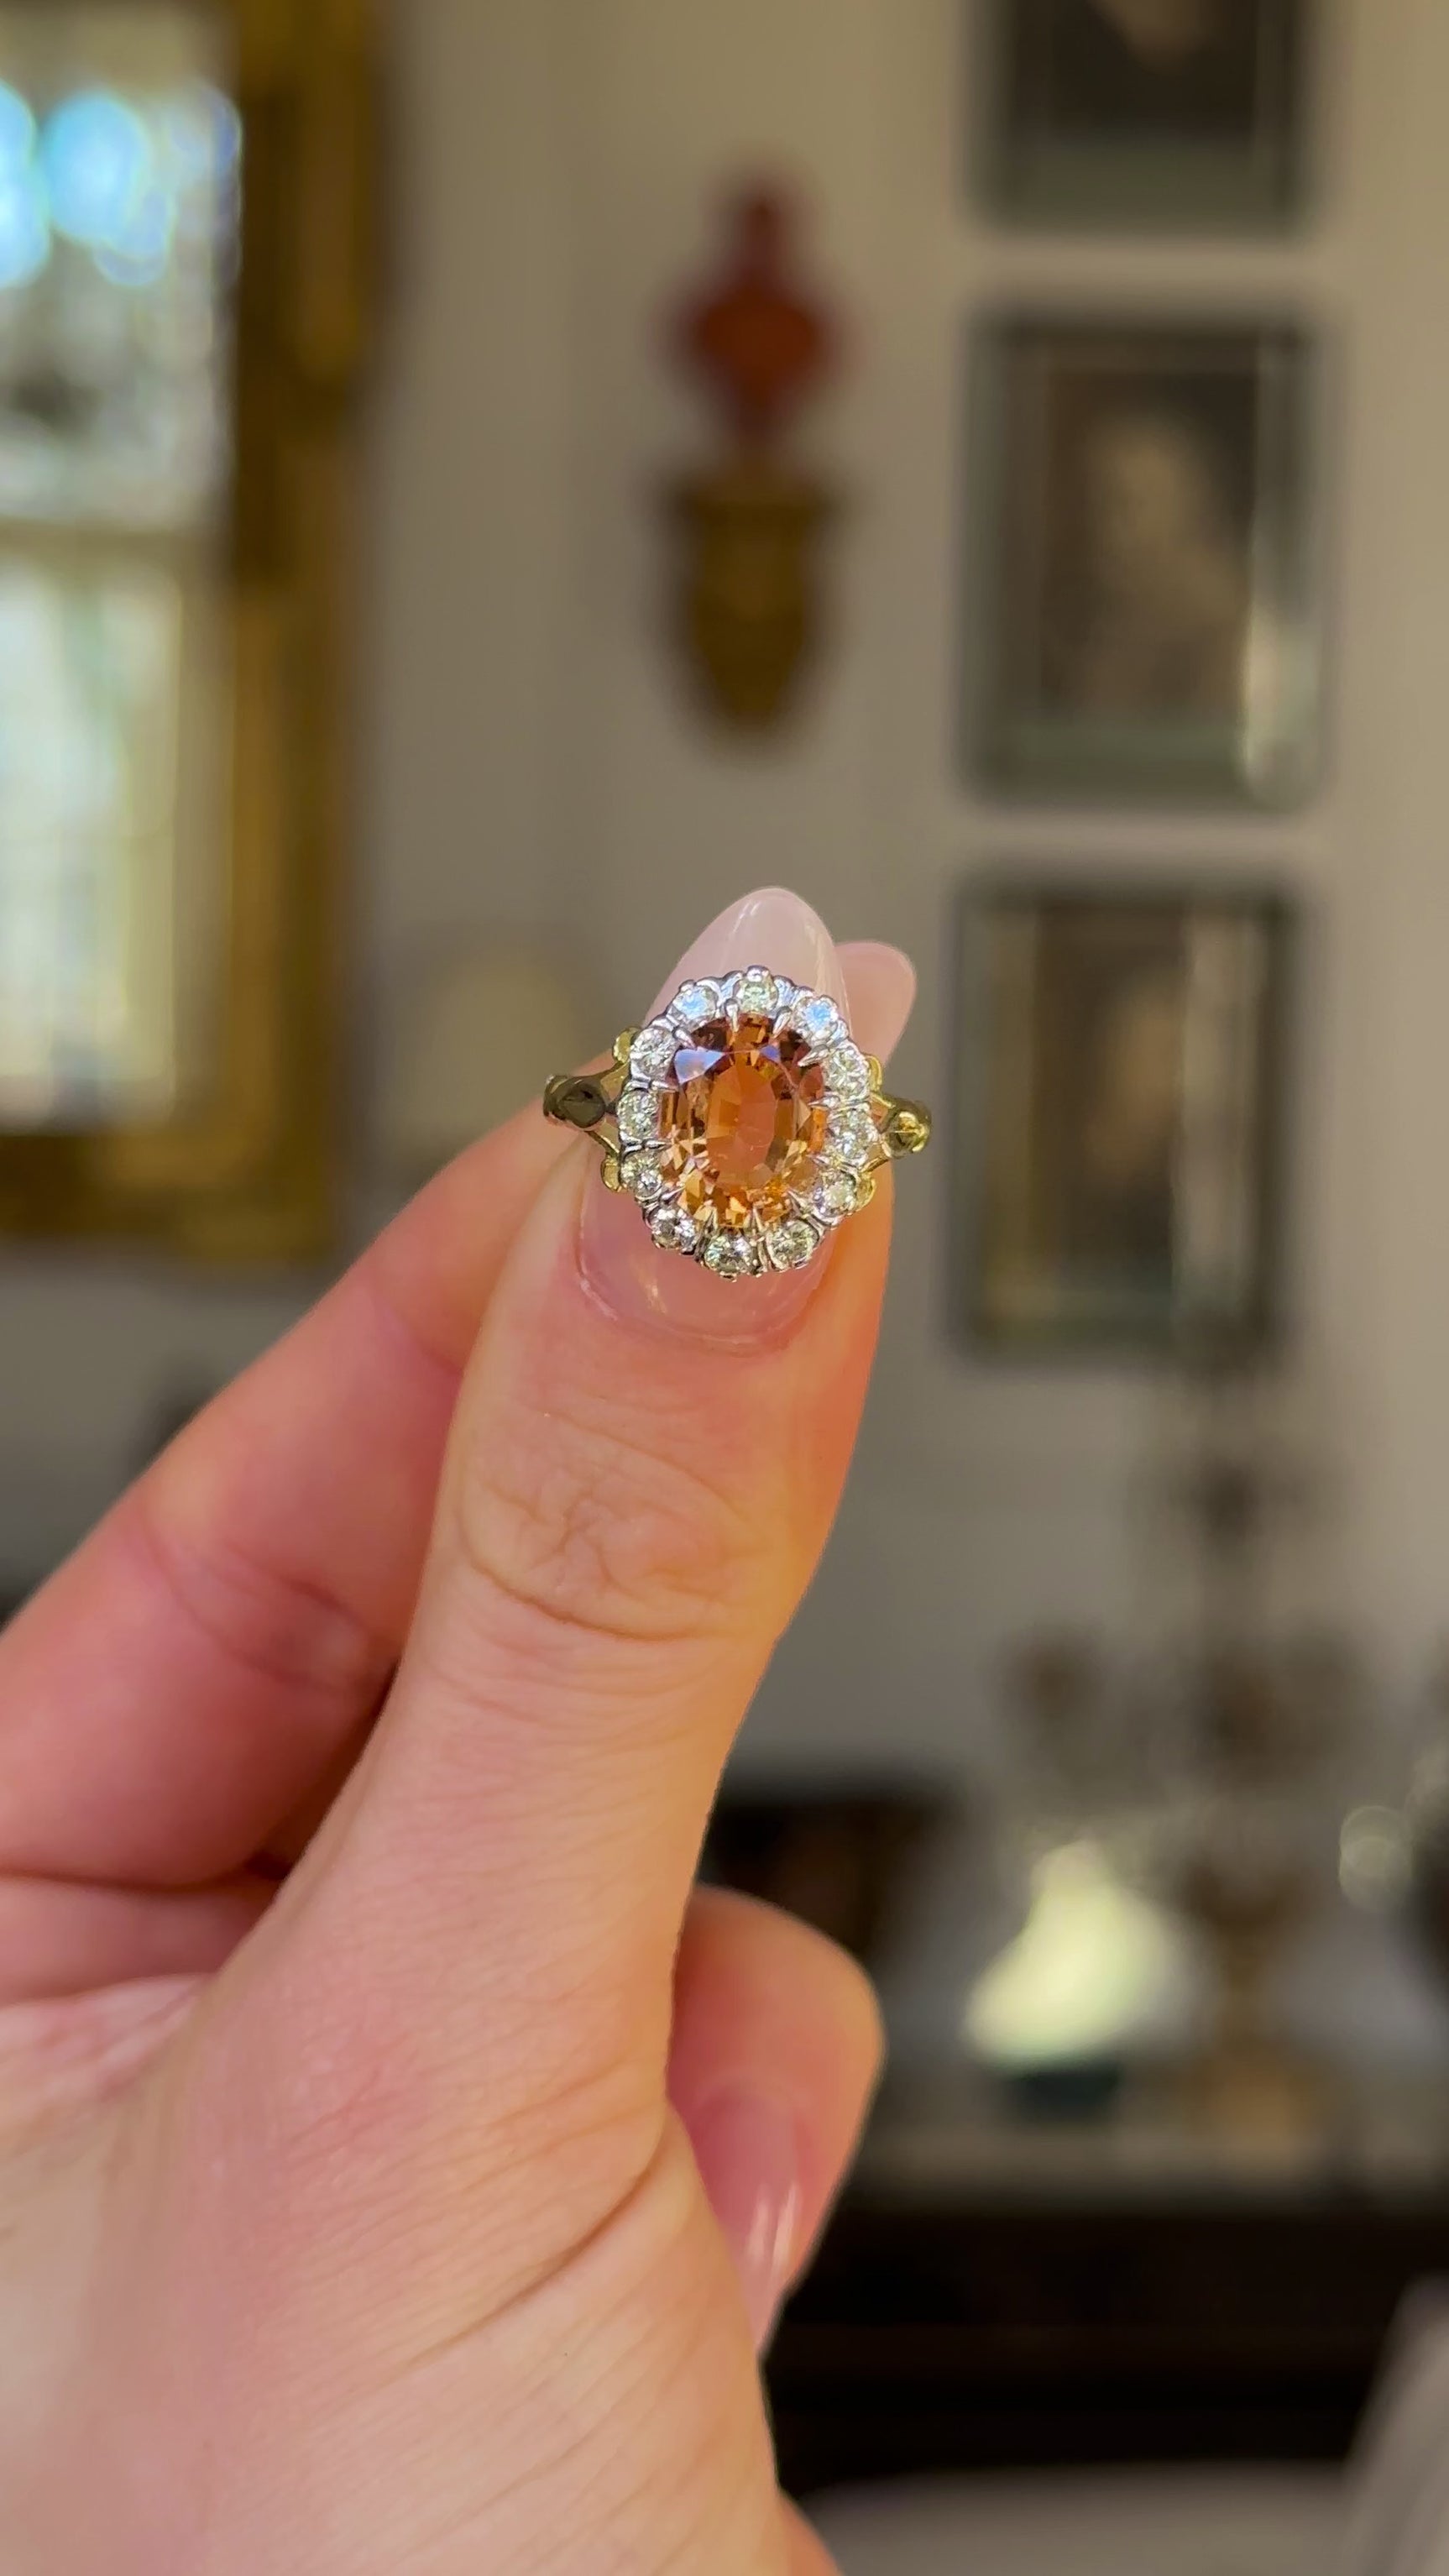 Antique, Victorian Topaz and Diamond Cluster Ring, 18ct Yellow Gold held in fingers and rotated to give perspective.